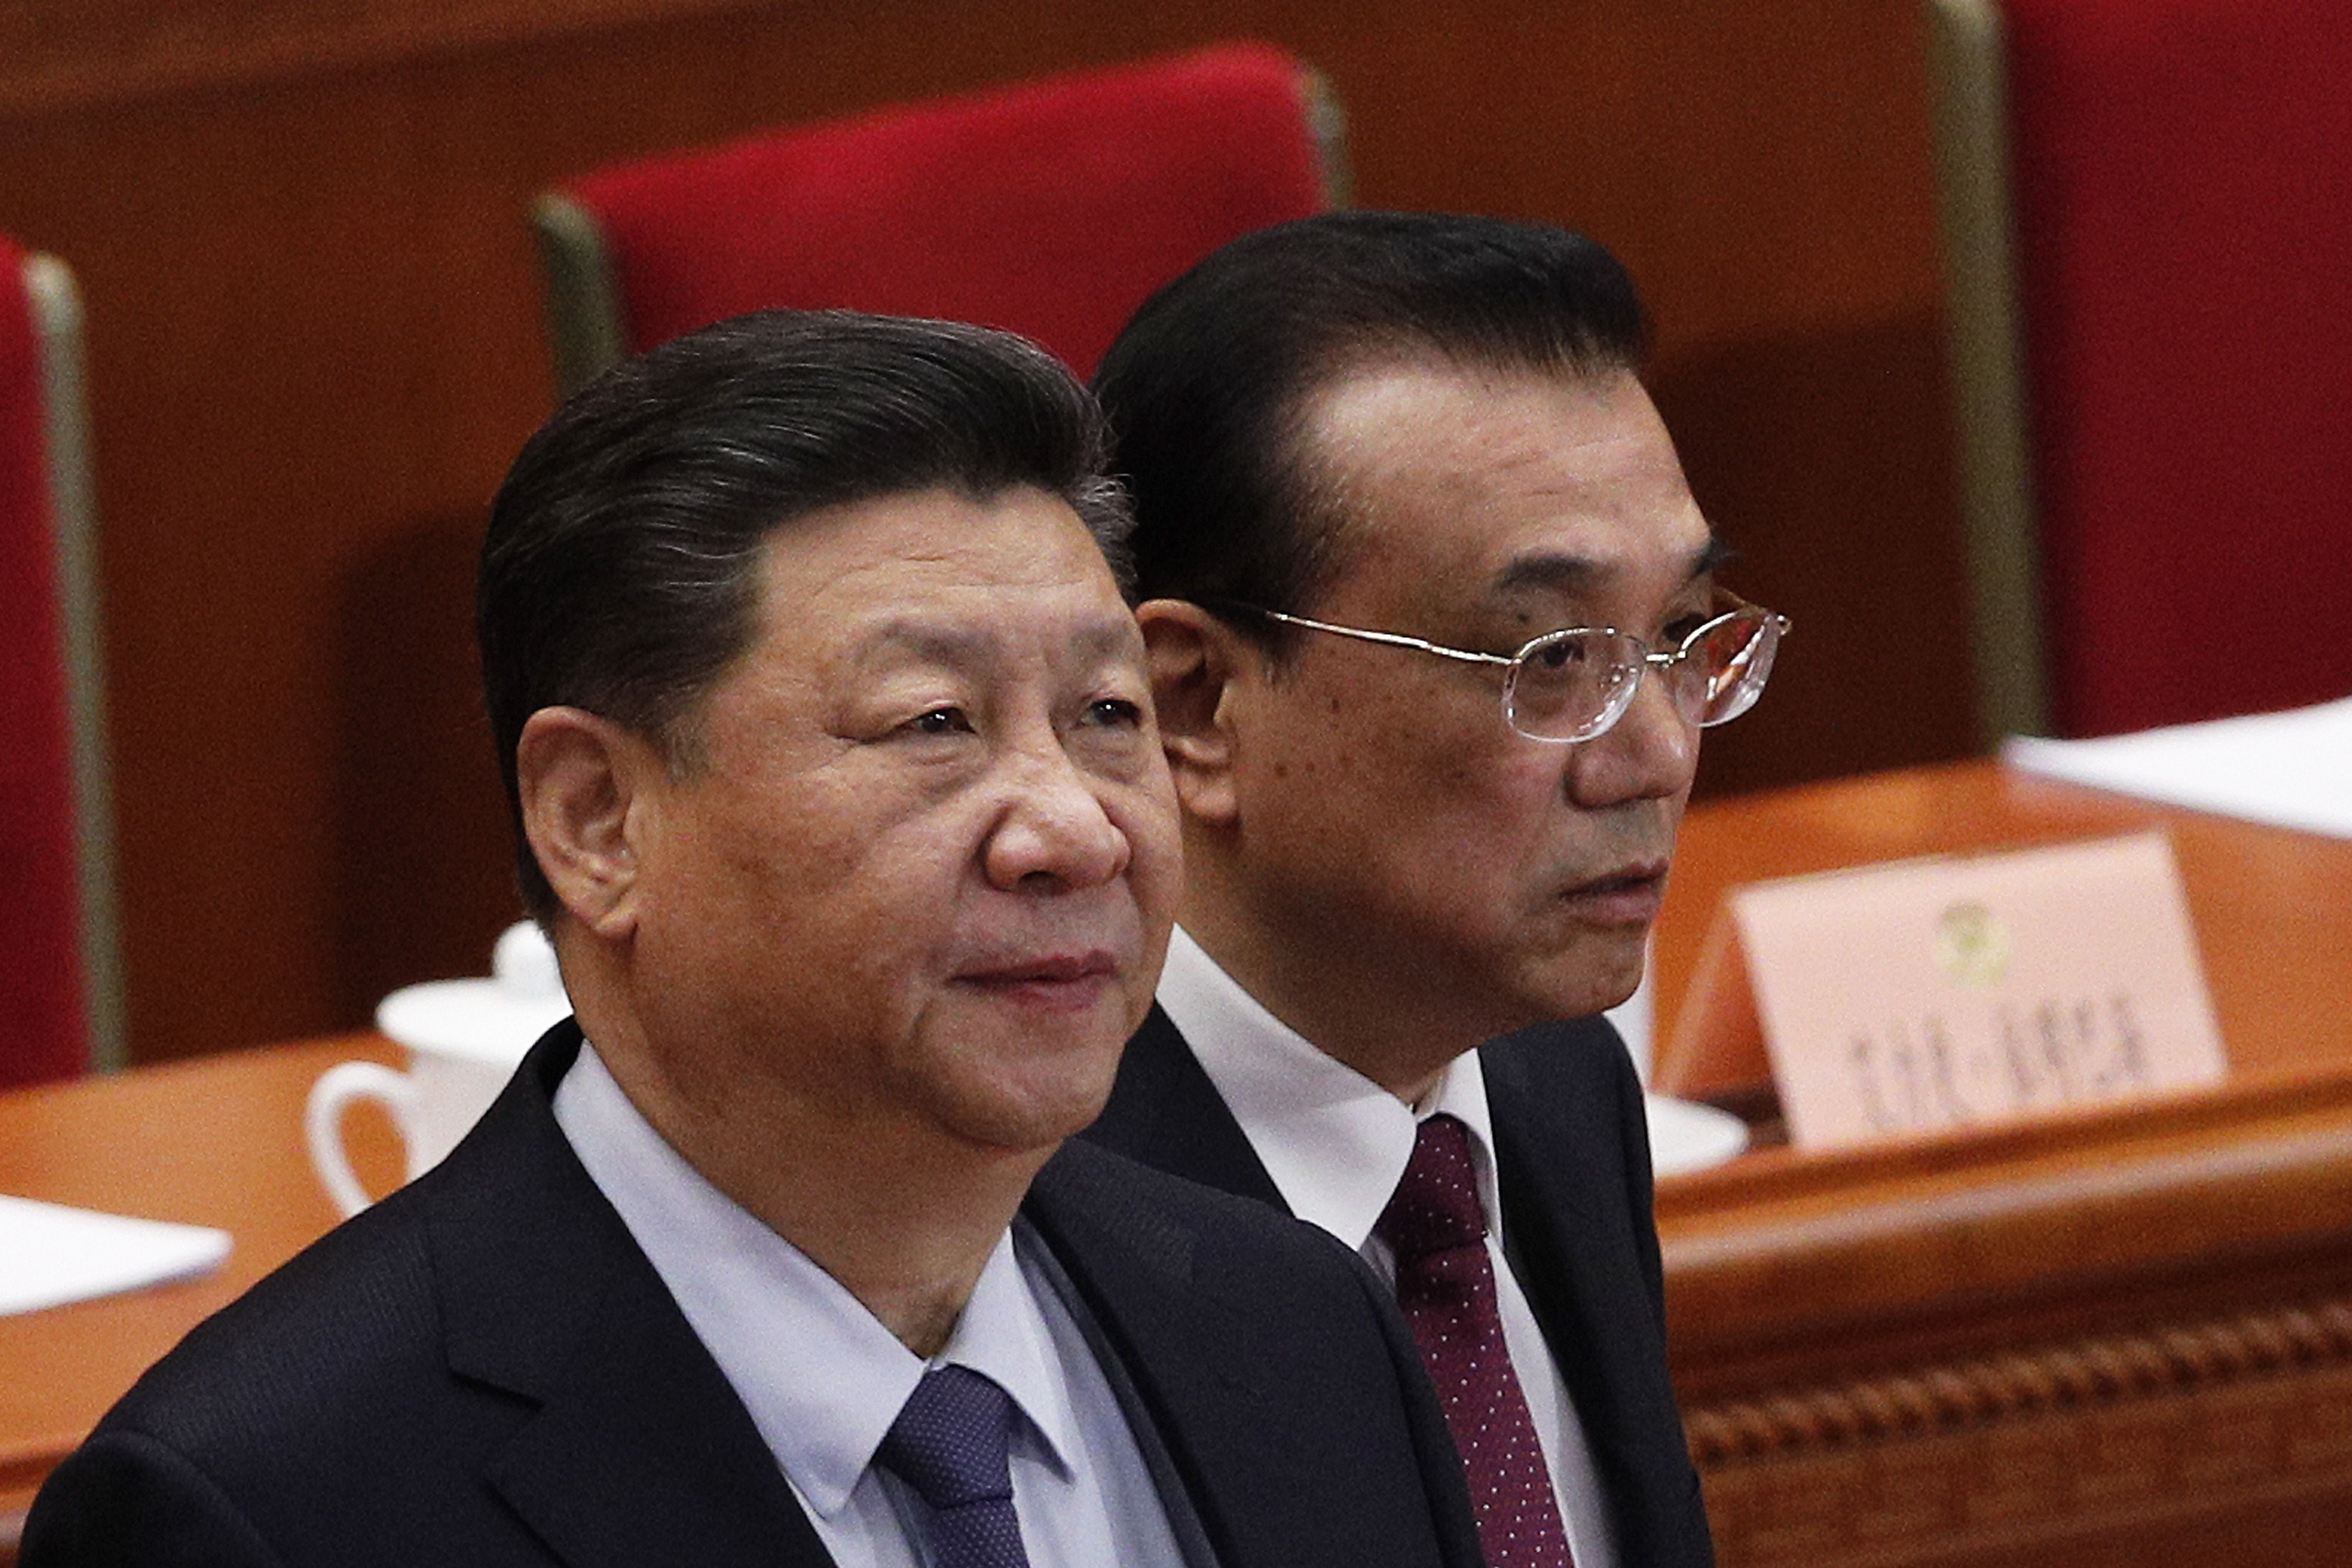 Chinese President Xi Jinping, left, and Premier Li Keqiang arrive for the closing session of the Chinese People's Political Consultative Conference (CPPCC) at the Great Hall of the People in Beijing, Wednesday, March 13, 2019. (AP Photo/Andy Wong)